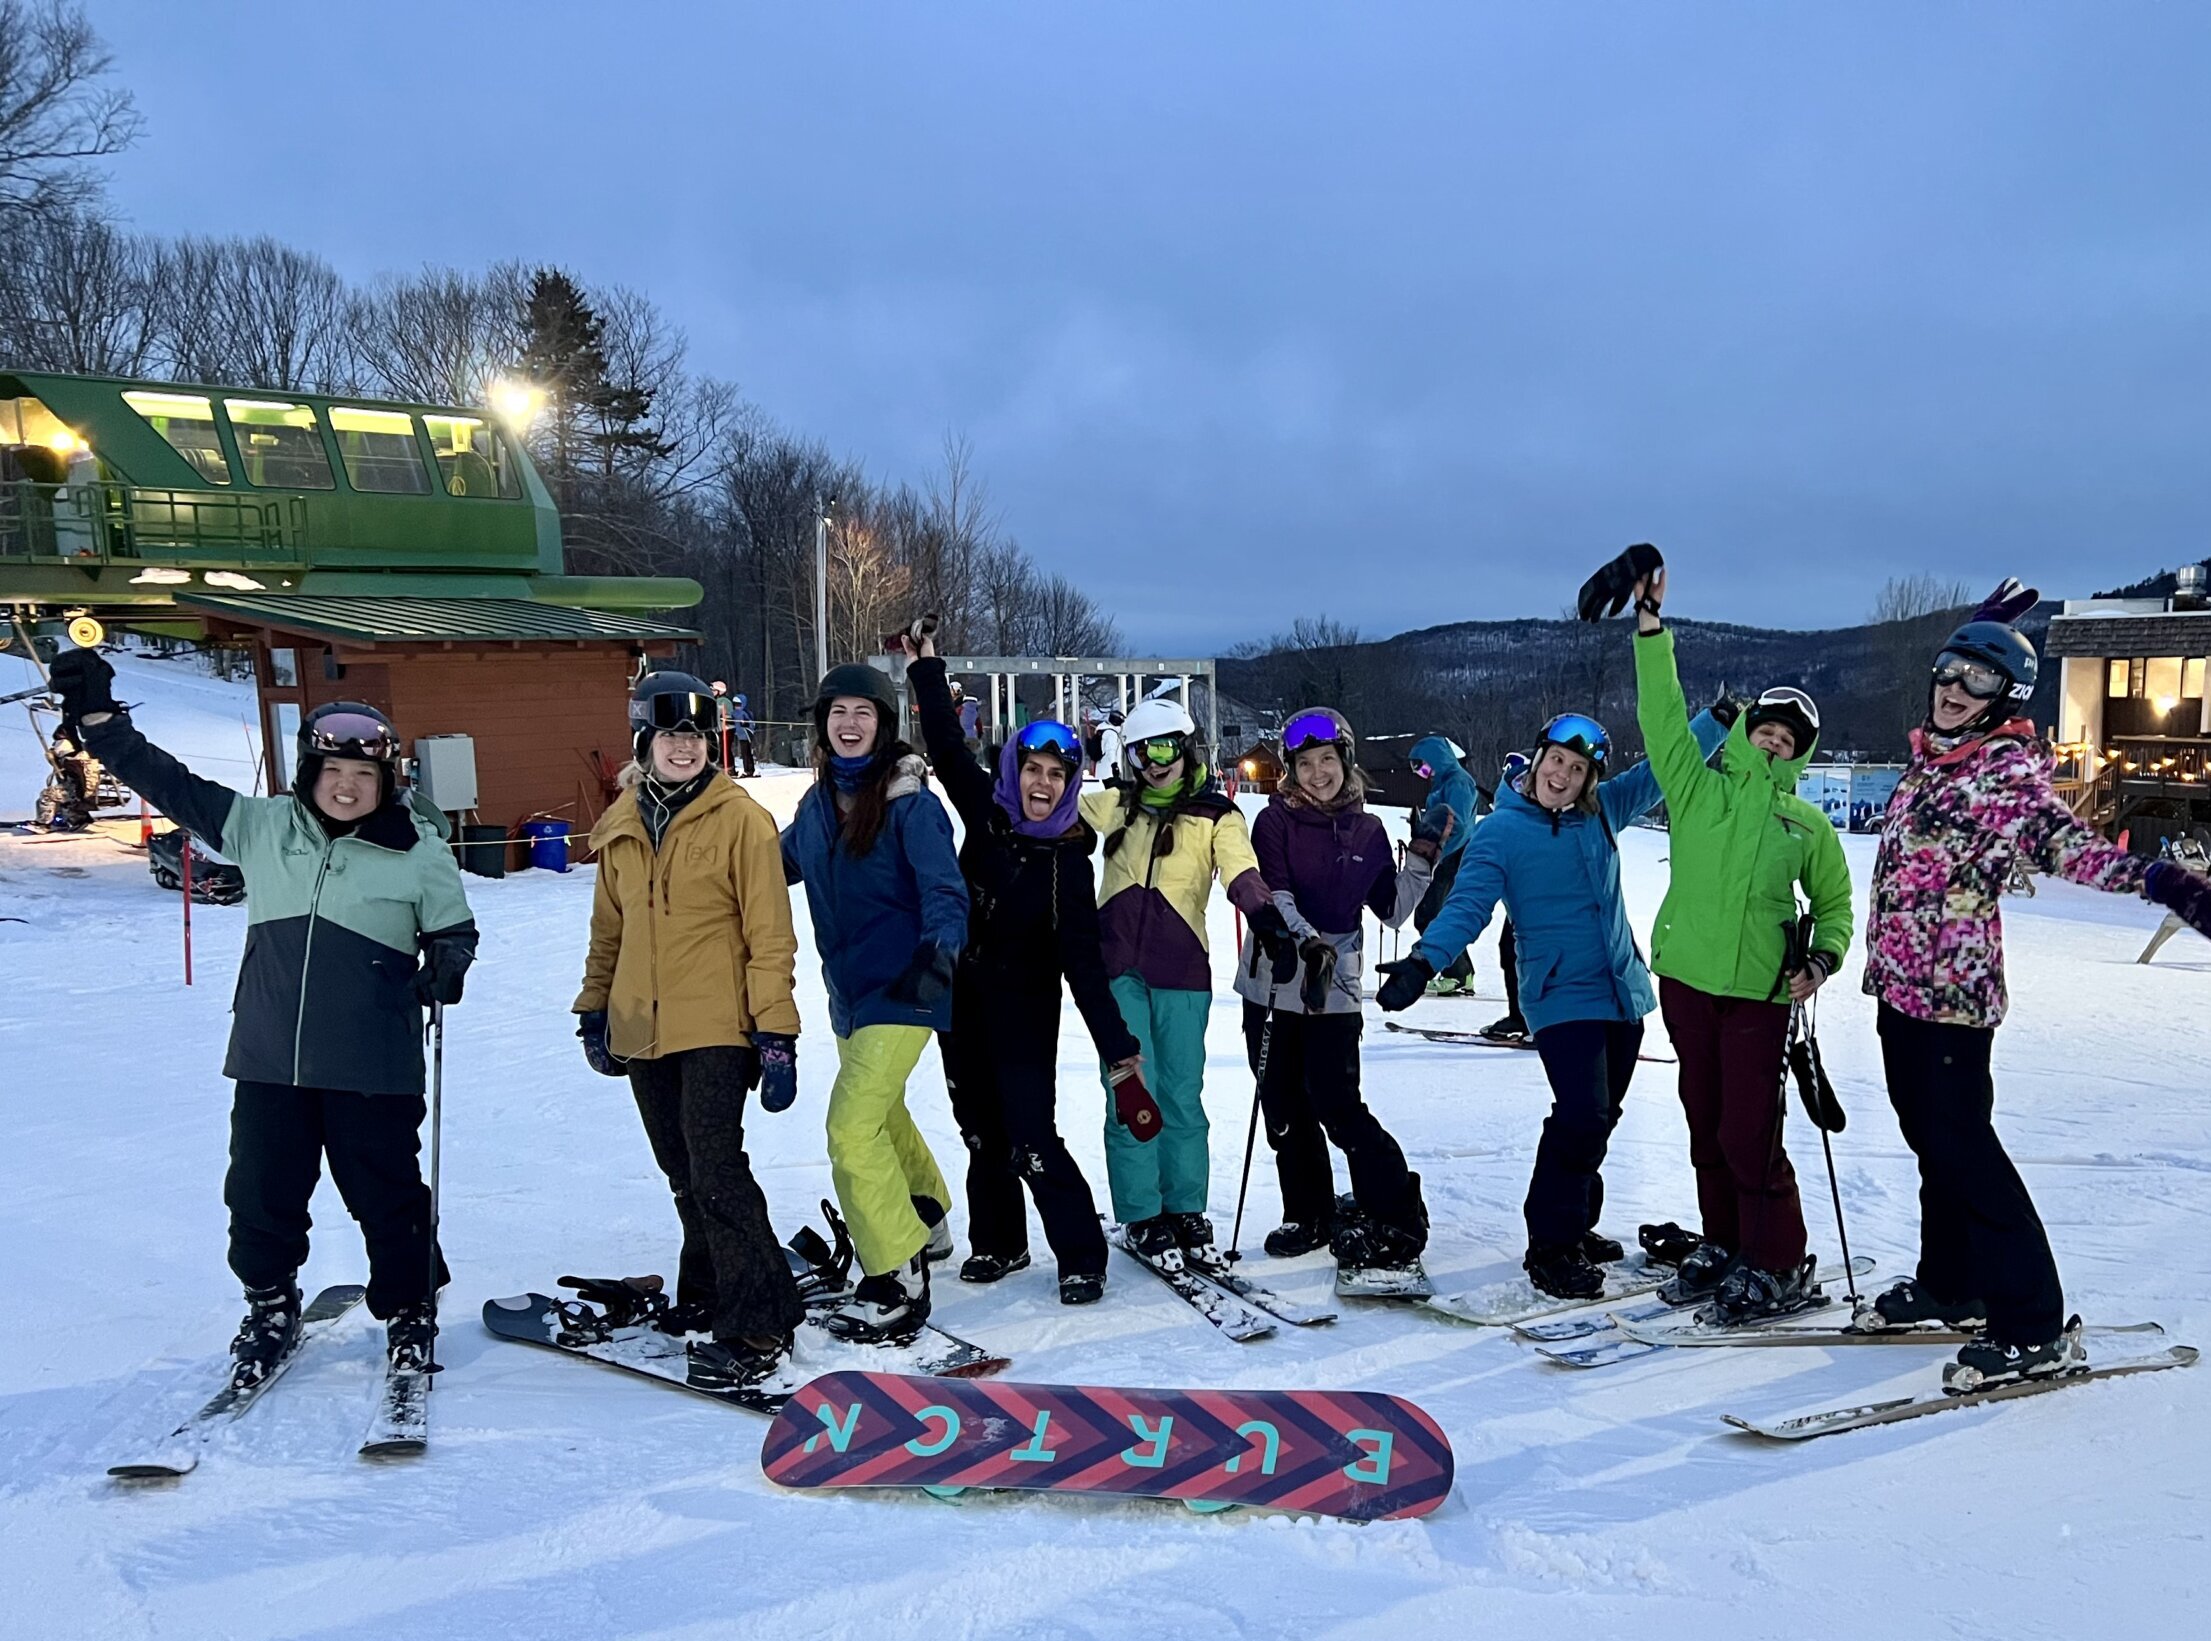 Group of skiiers and snowboarders pose together on the base of the mountain